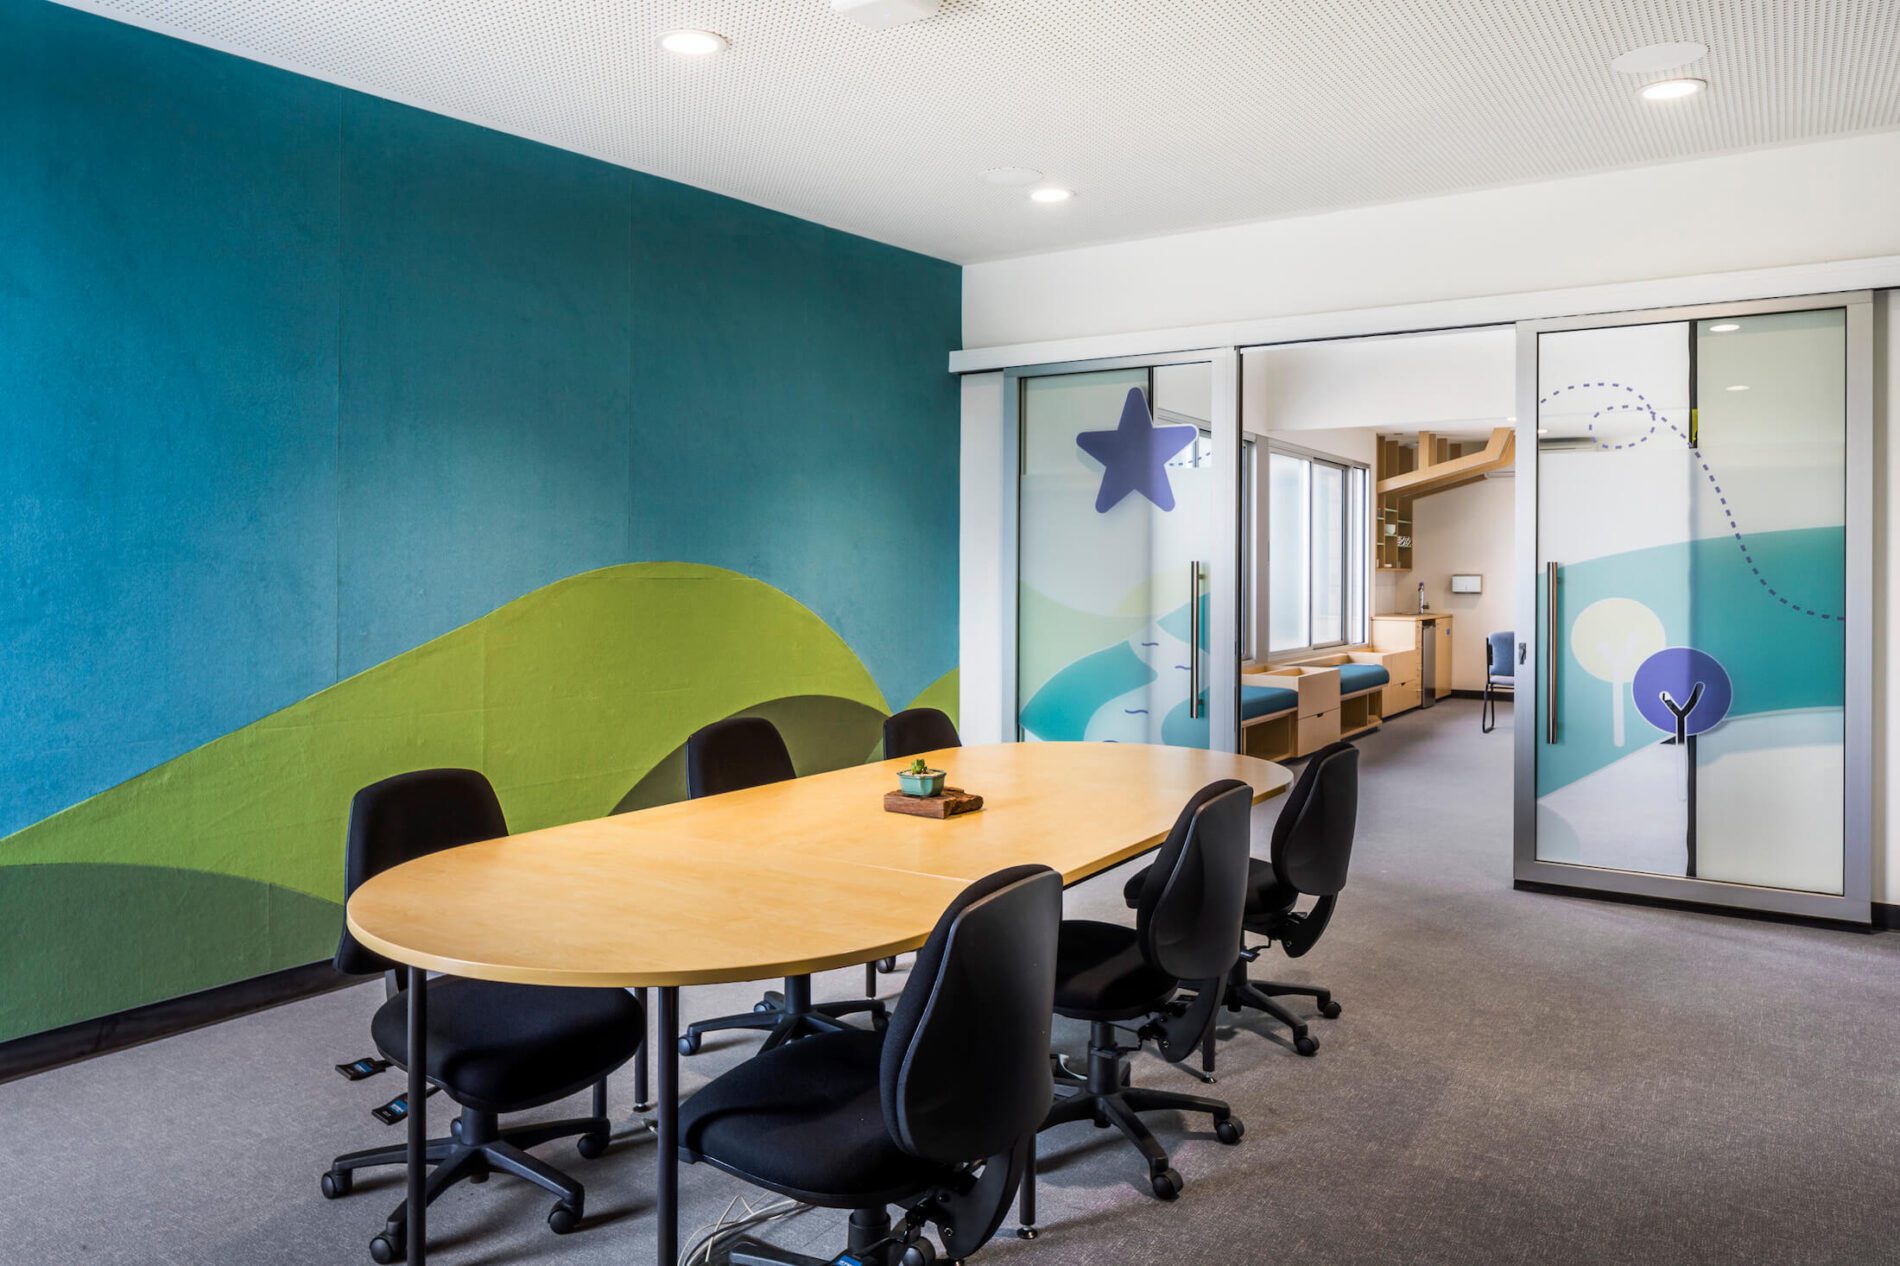 Boardroom with table and chairs, and tactile wall mural